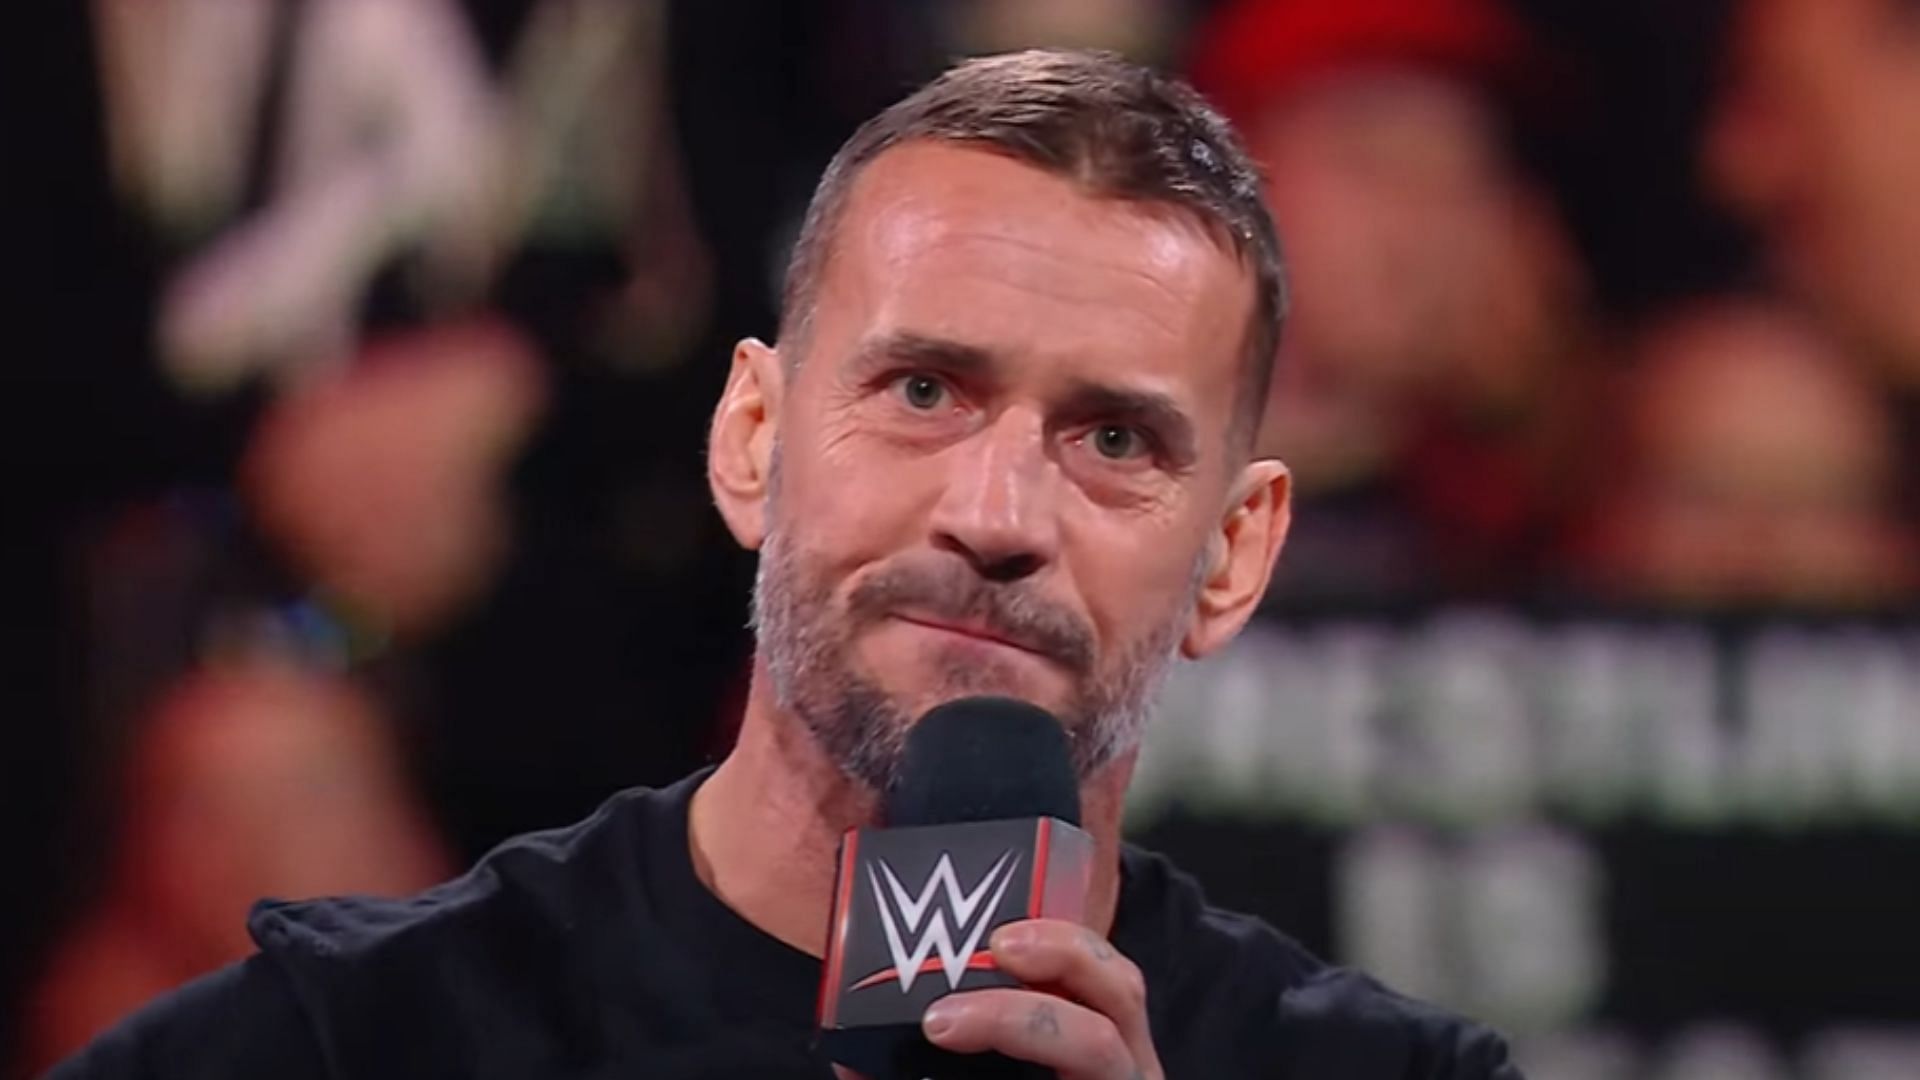 Many thought CM Punk would never appear in WWE again